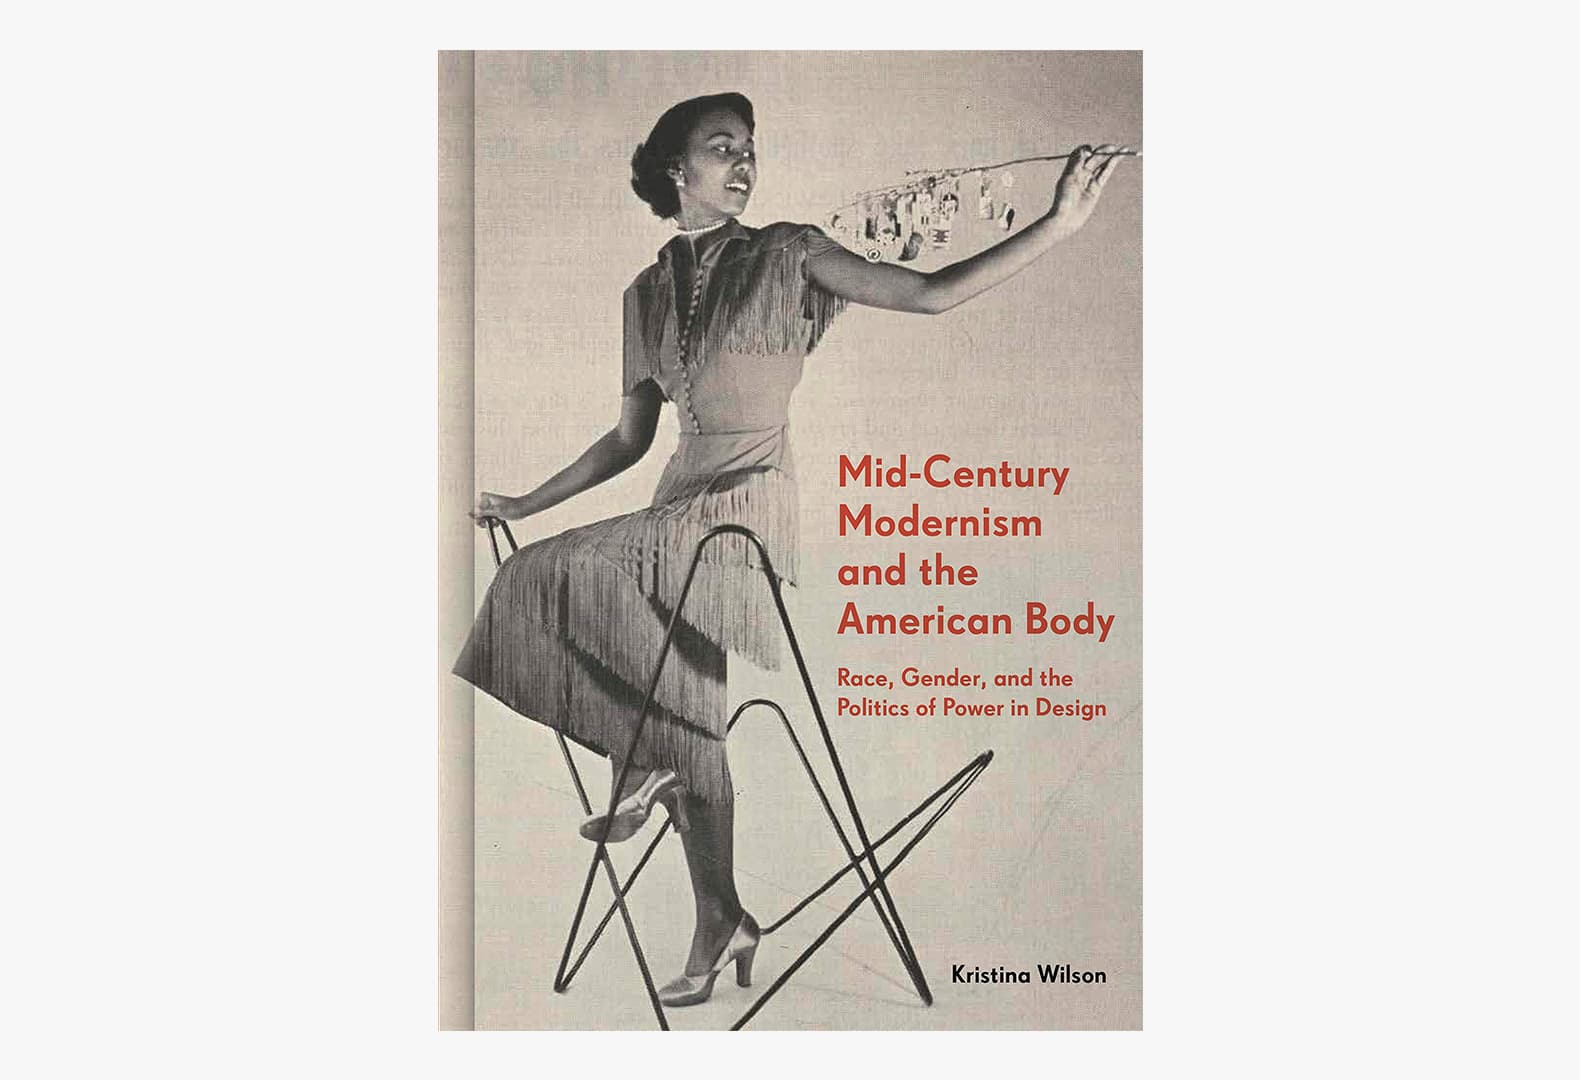 Mid-Century Modernism and the American Body. Race, Gender and the Politics of Power in Design, Princeton University Press 2021